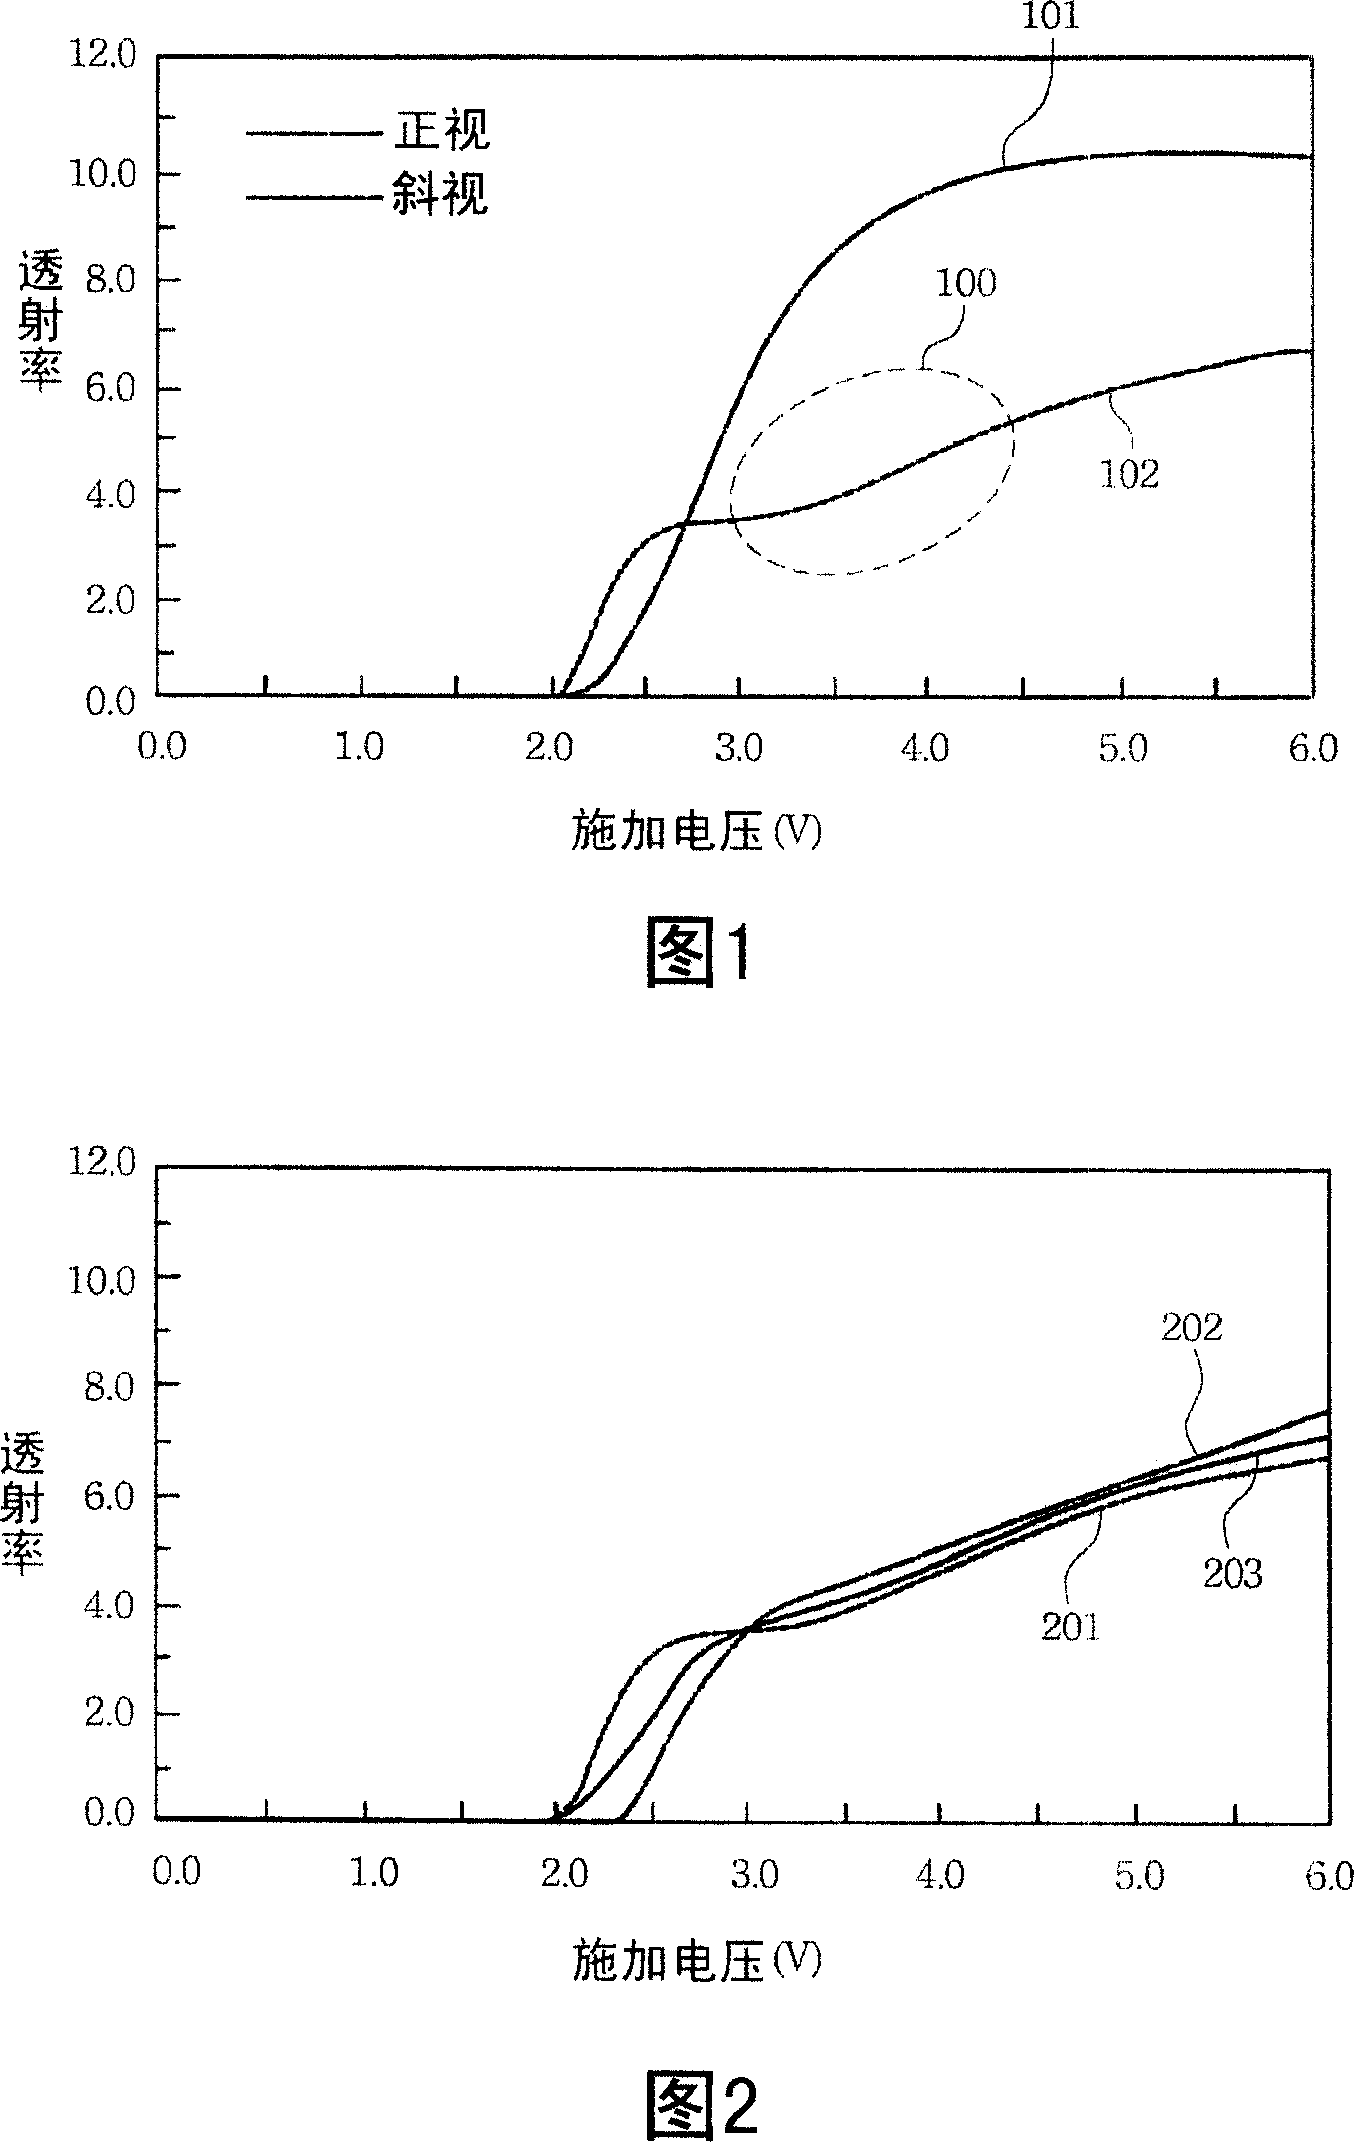 Structure of liquid crystal display